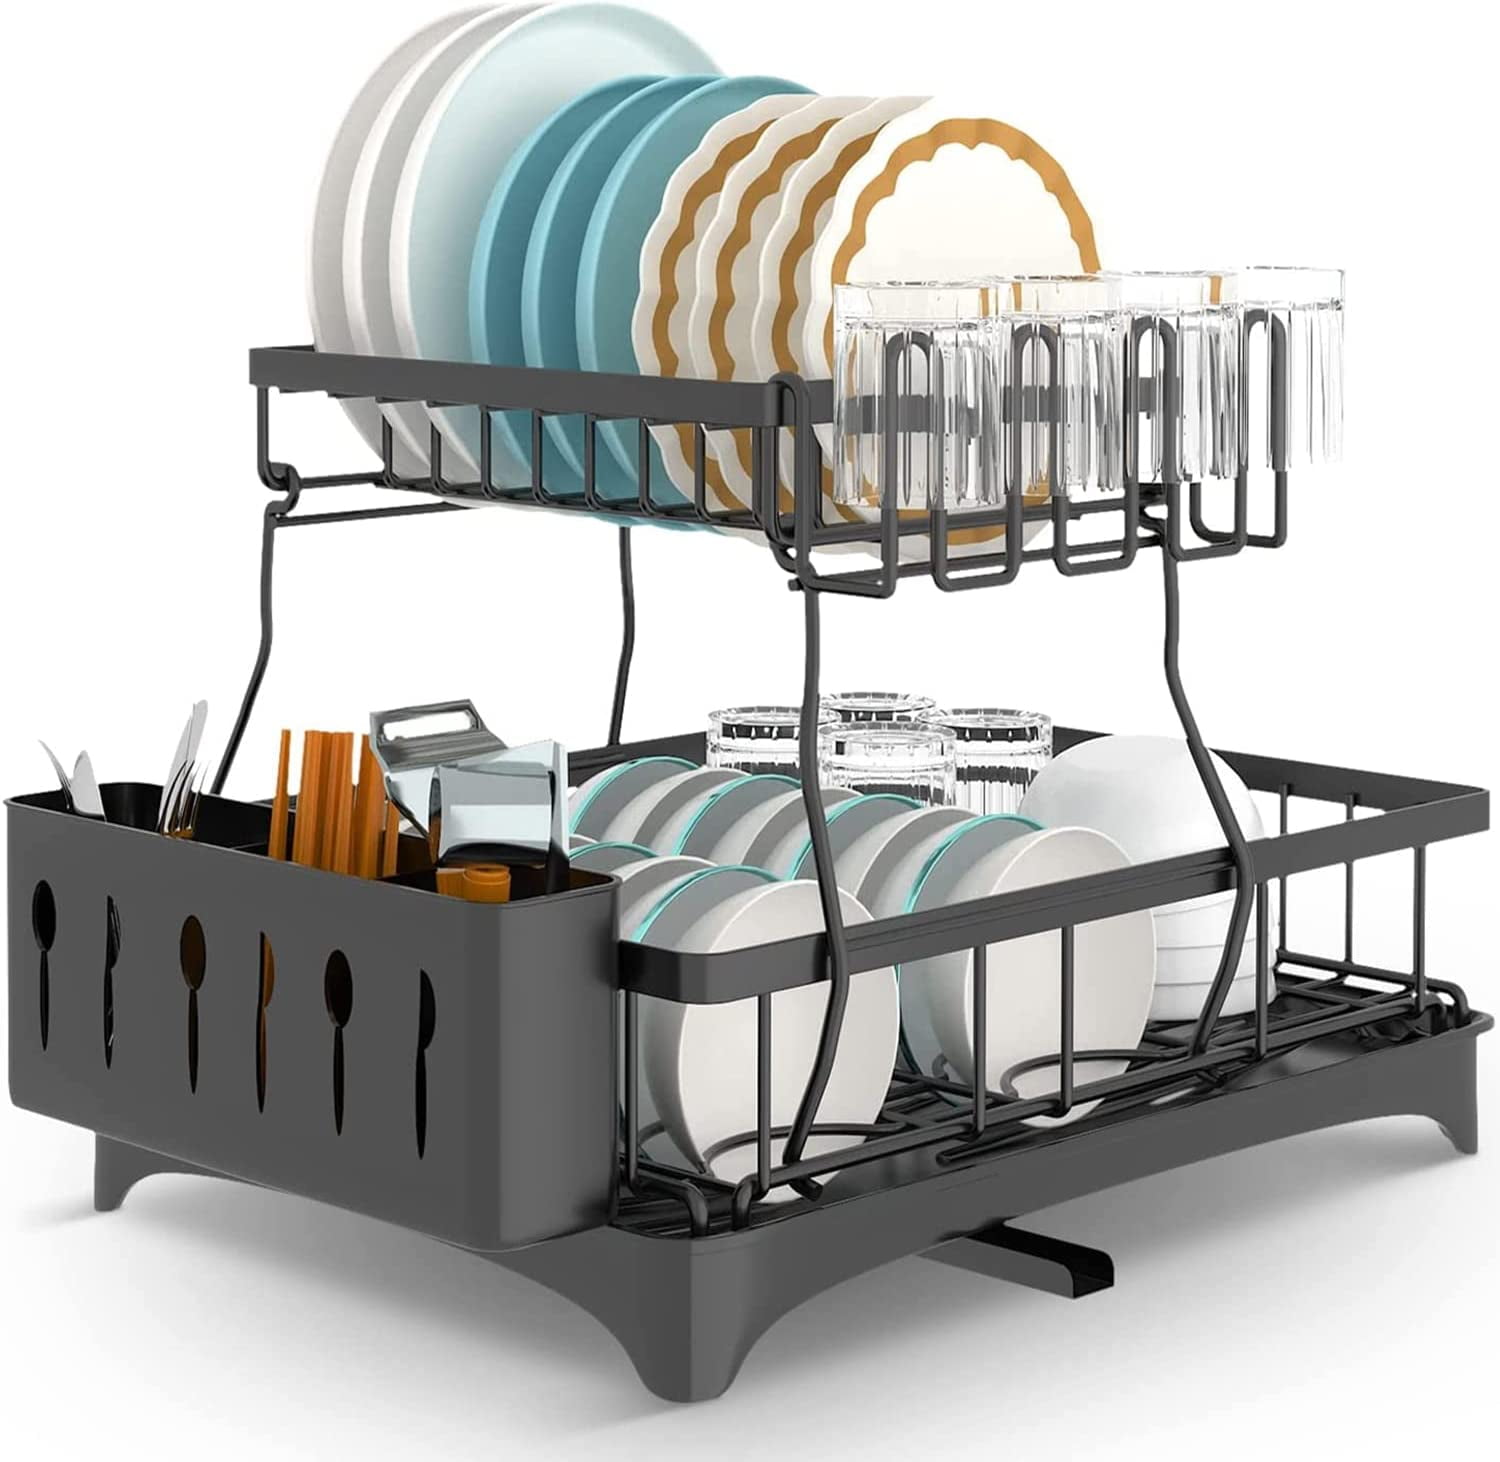  Vasysvi Dish Drying Rack with Drainboard for Kitchen Counter,2  Tier Dish Drainer Set with Utensils Holder Large Capacity Dish Rack with  Drying Mat